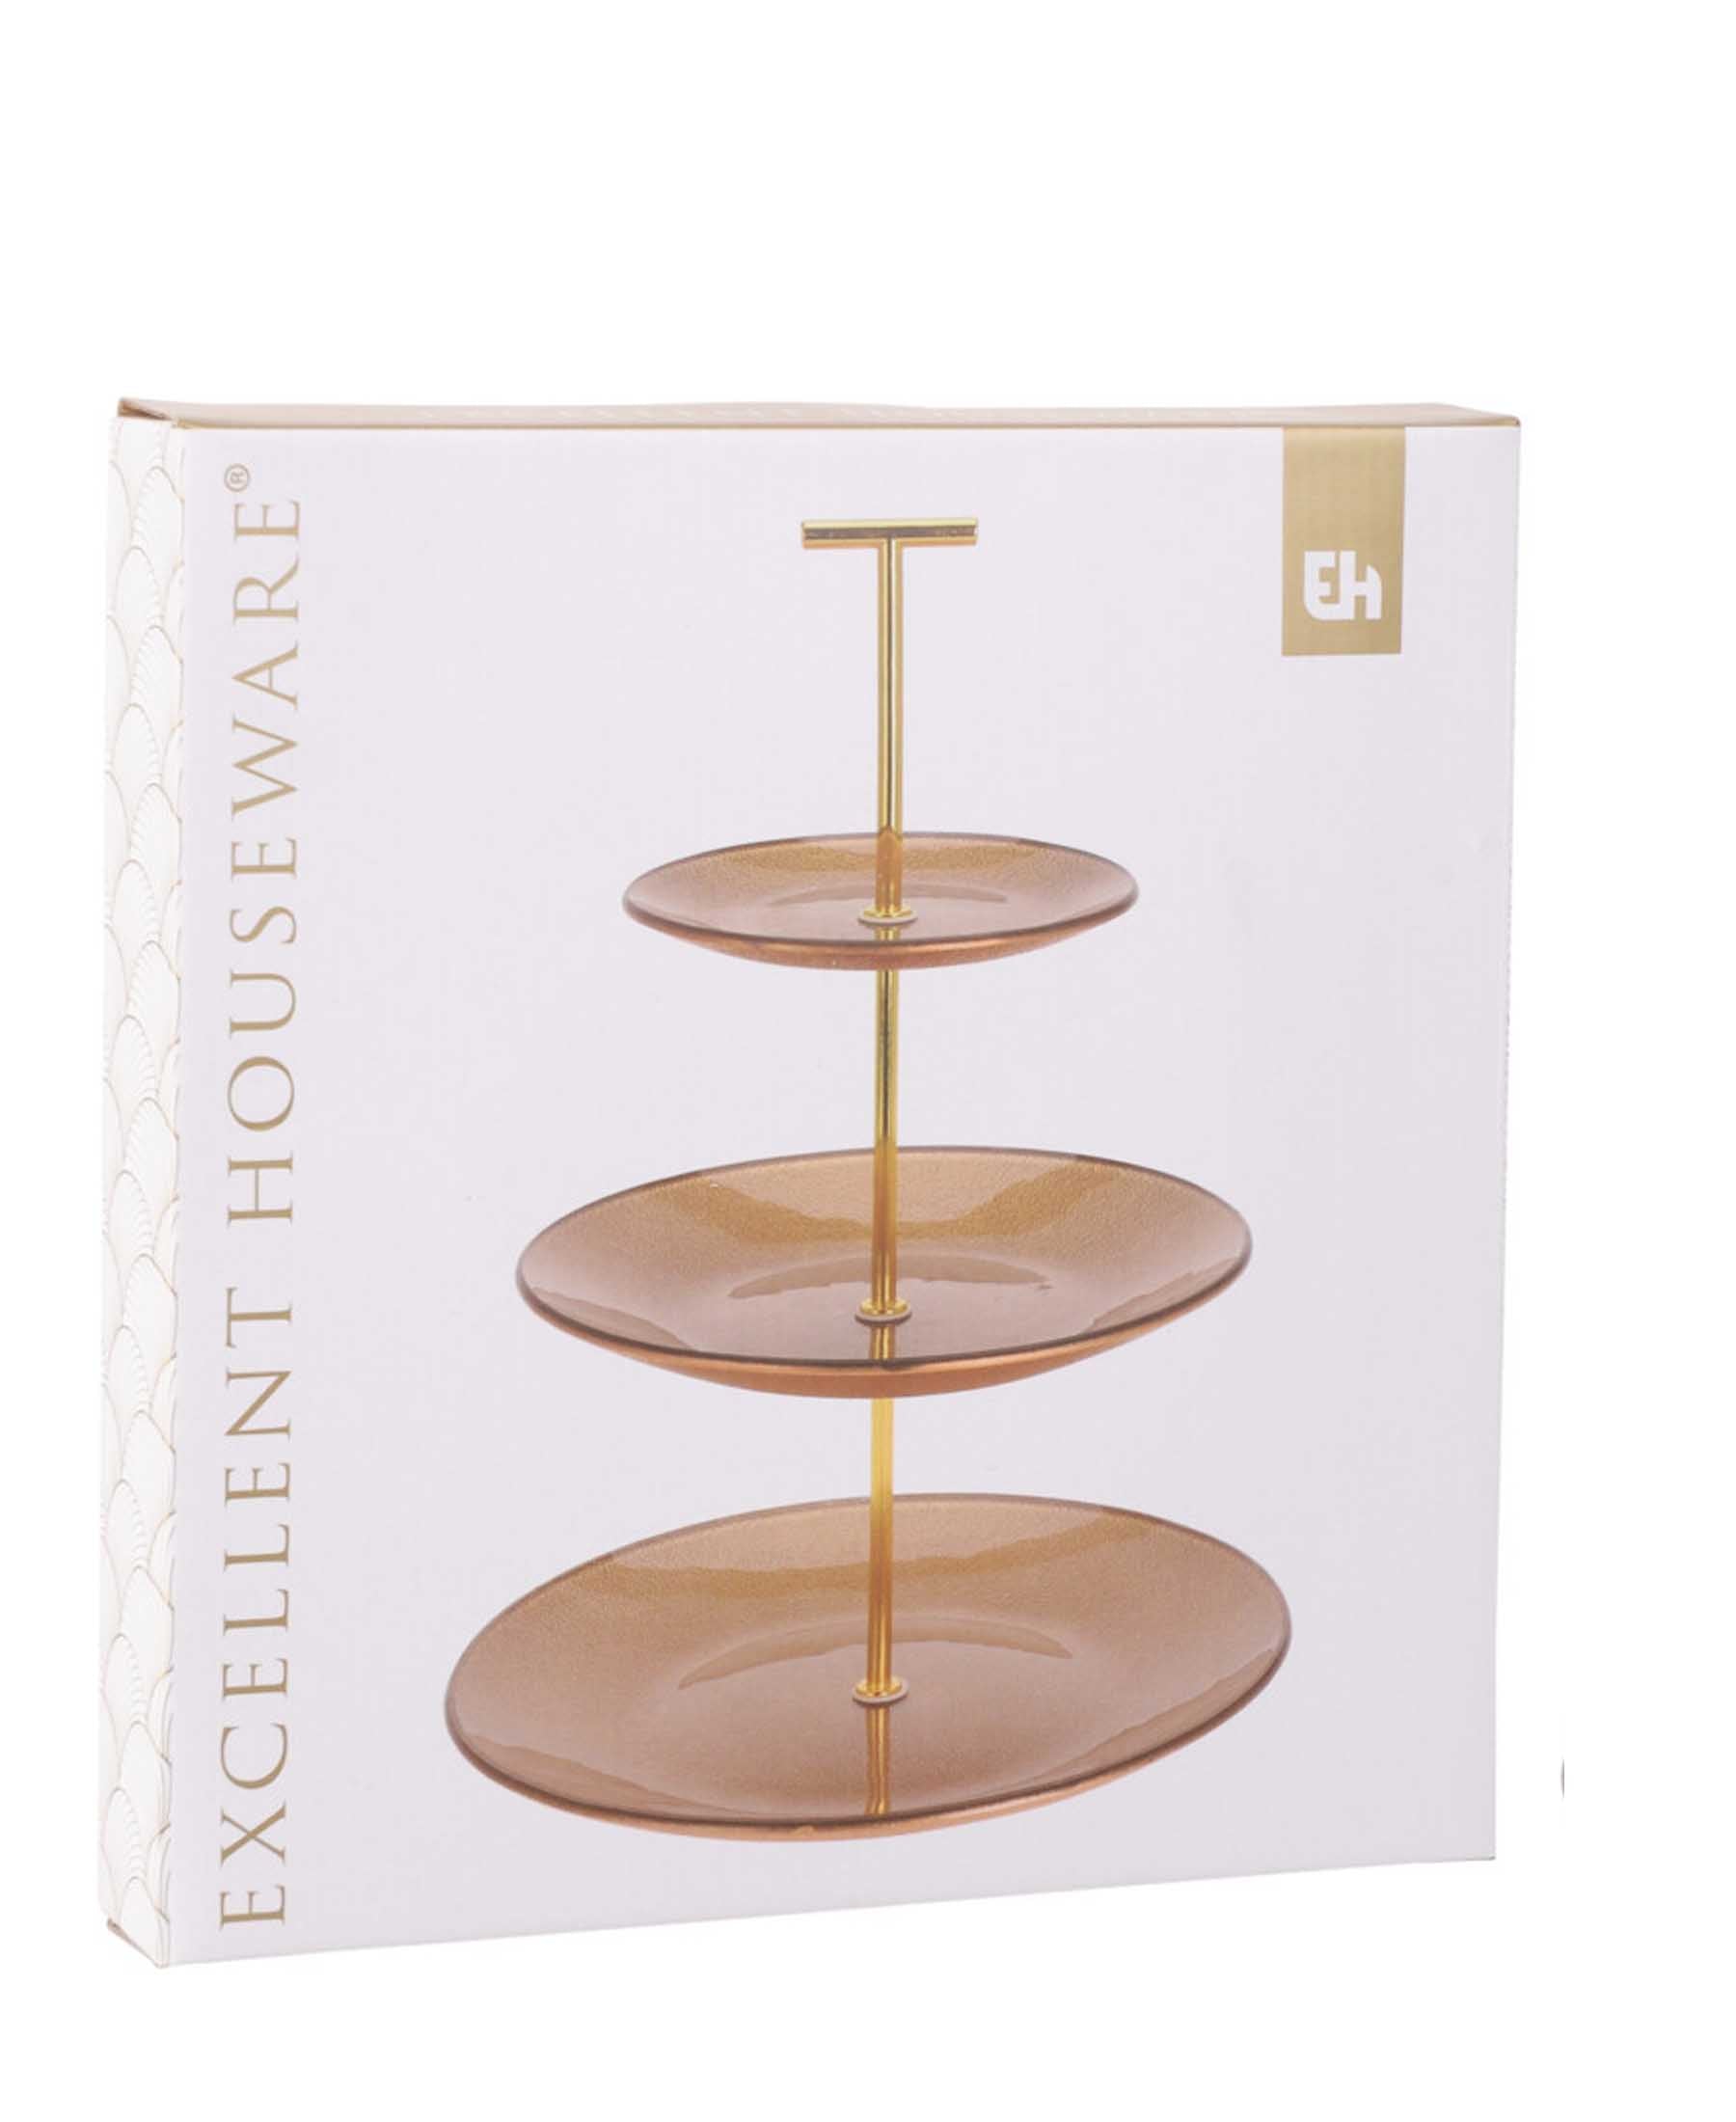 Excellent Houseware 3 Tier Footed Glass Stand - Gold